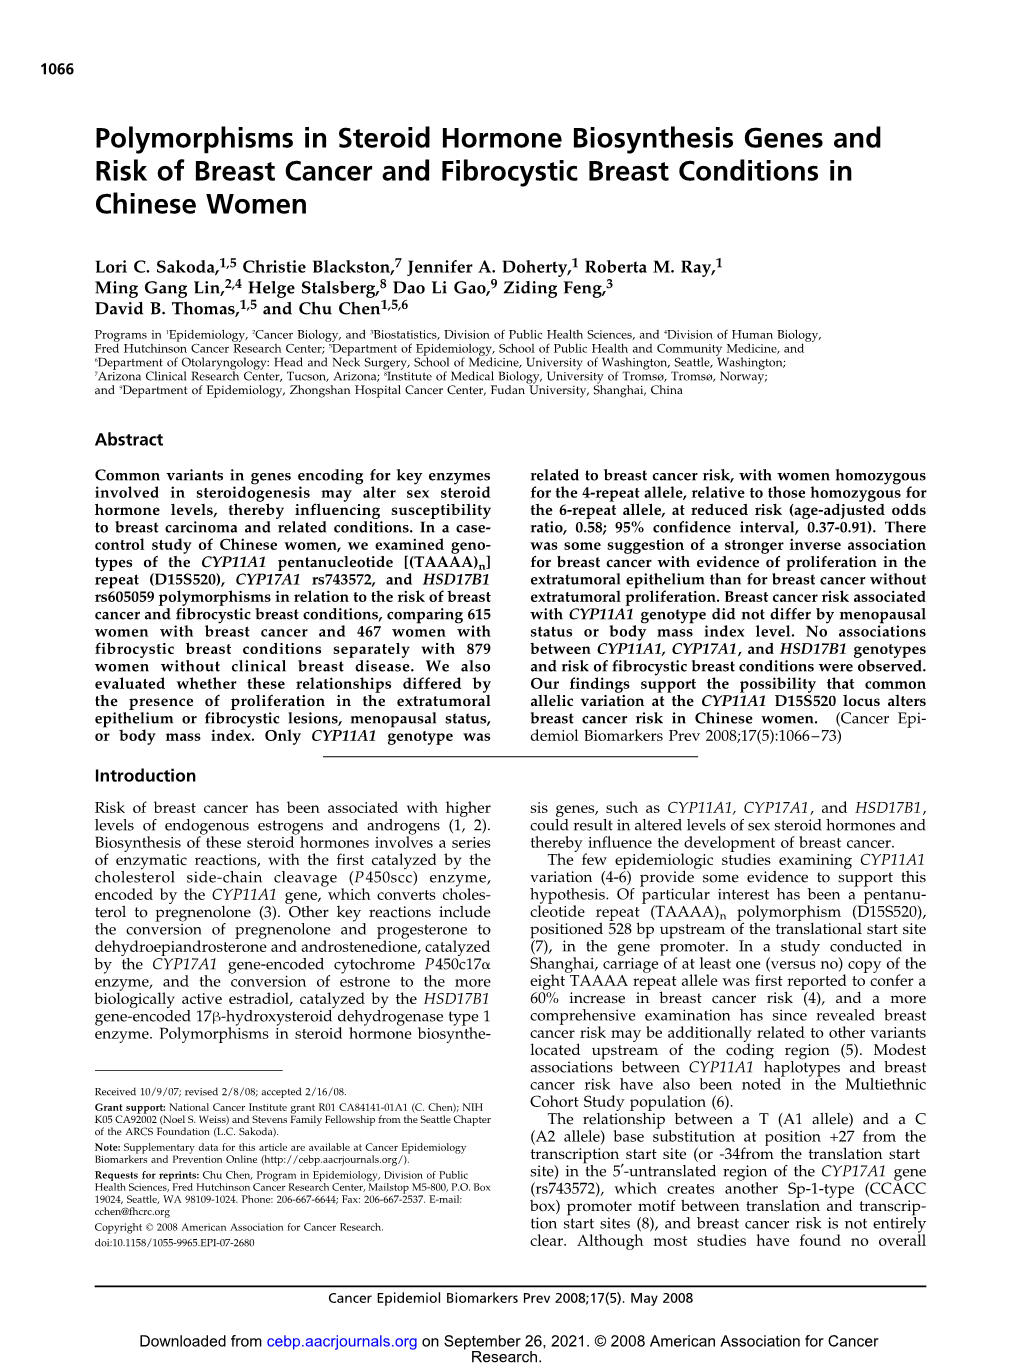 Polymorphisms in Steroid Hormone Biosynthesis Genes and Risk of Breast Cancer and Fibrocystic Breast Conditions in Chinese Women